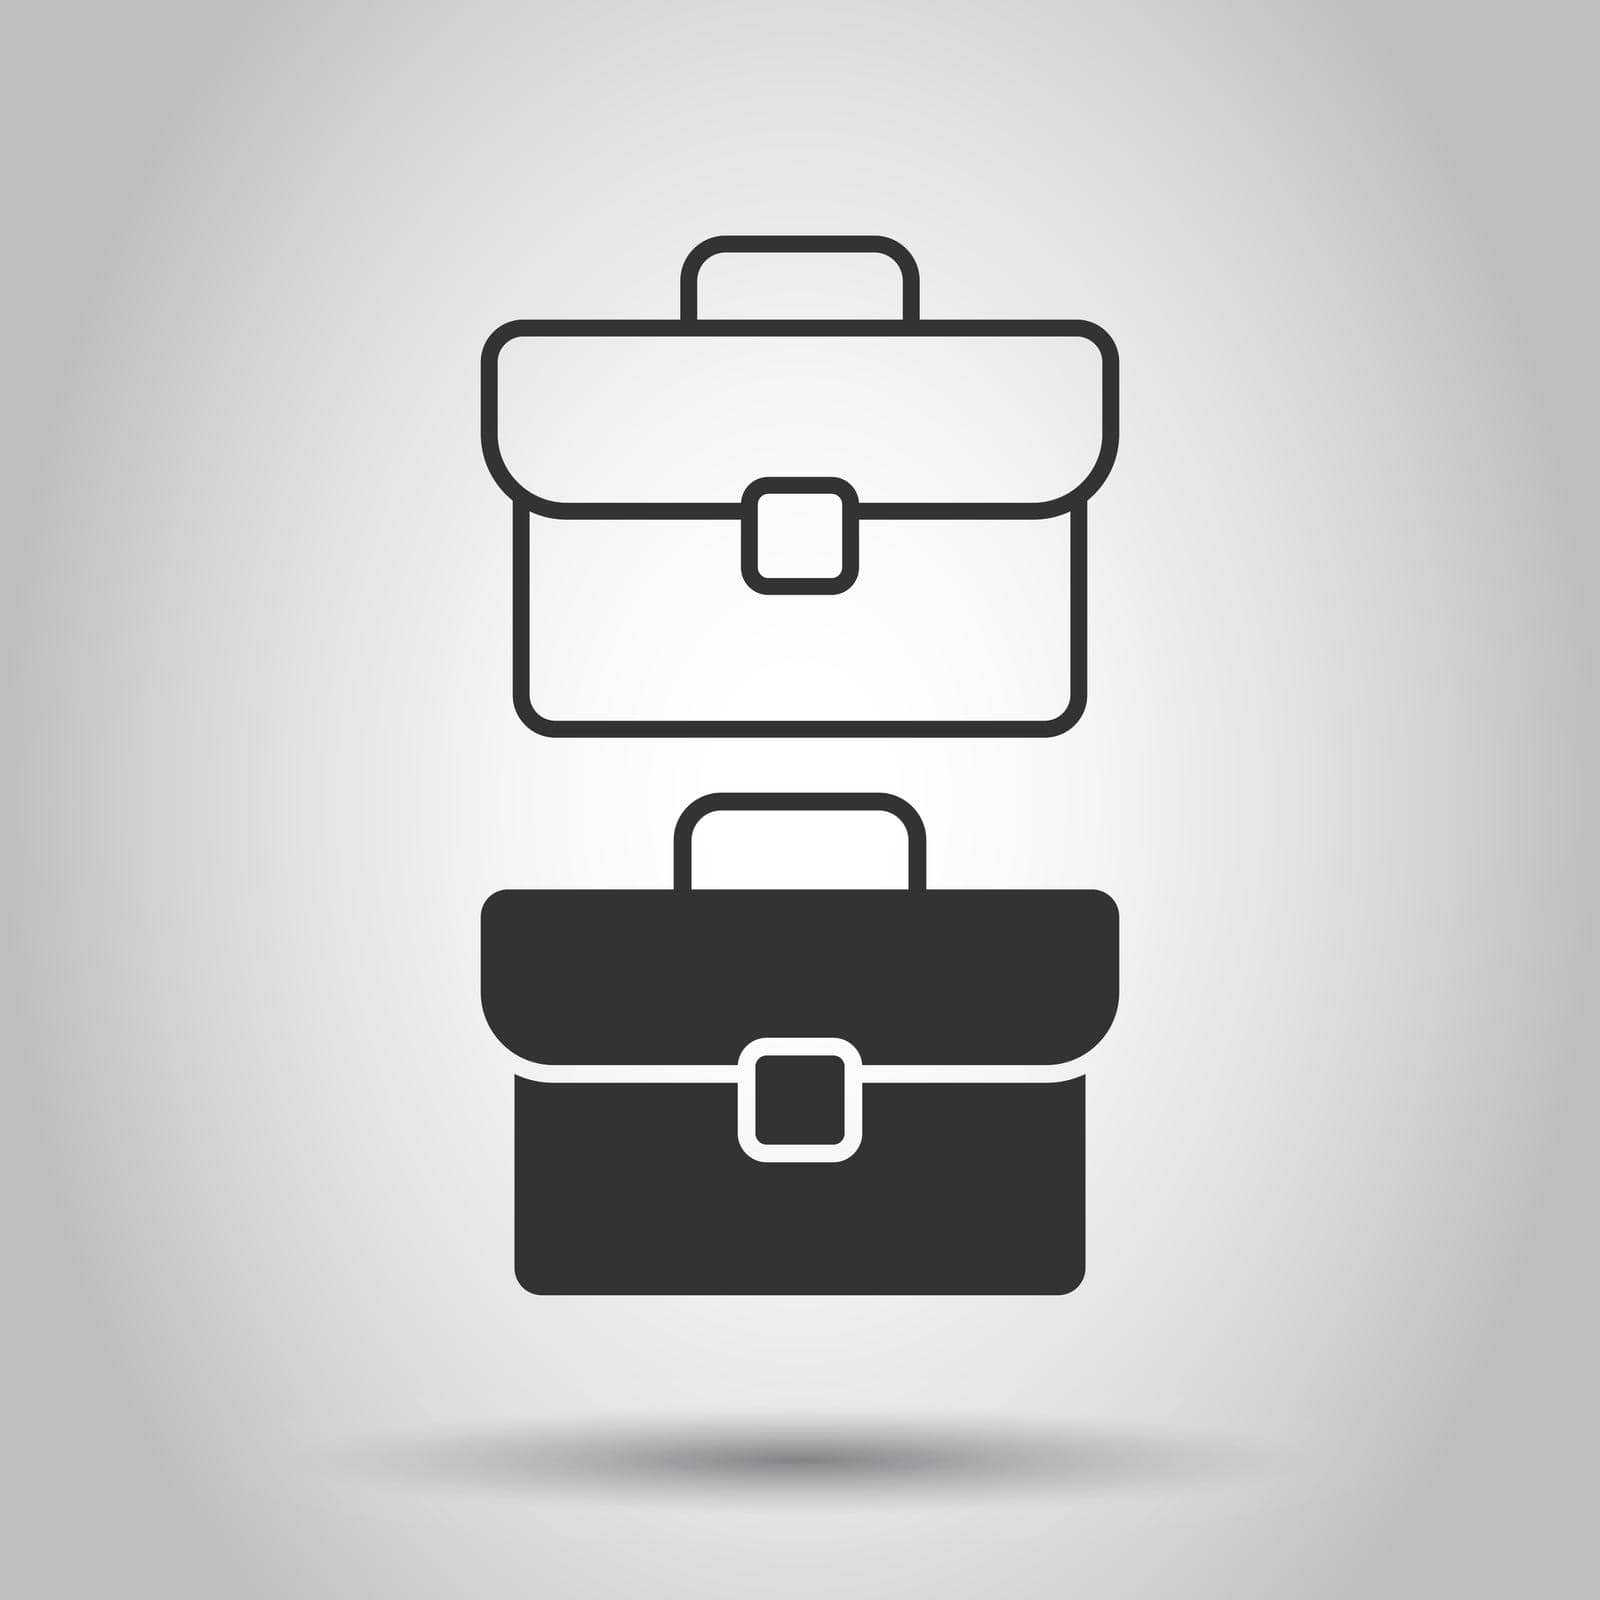 Briefcase icon in flat style. Businessman bag vector illustration on white isolated background. Portfolio business concept.